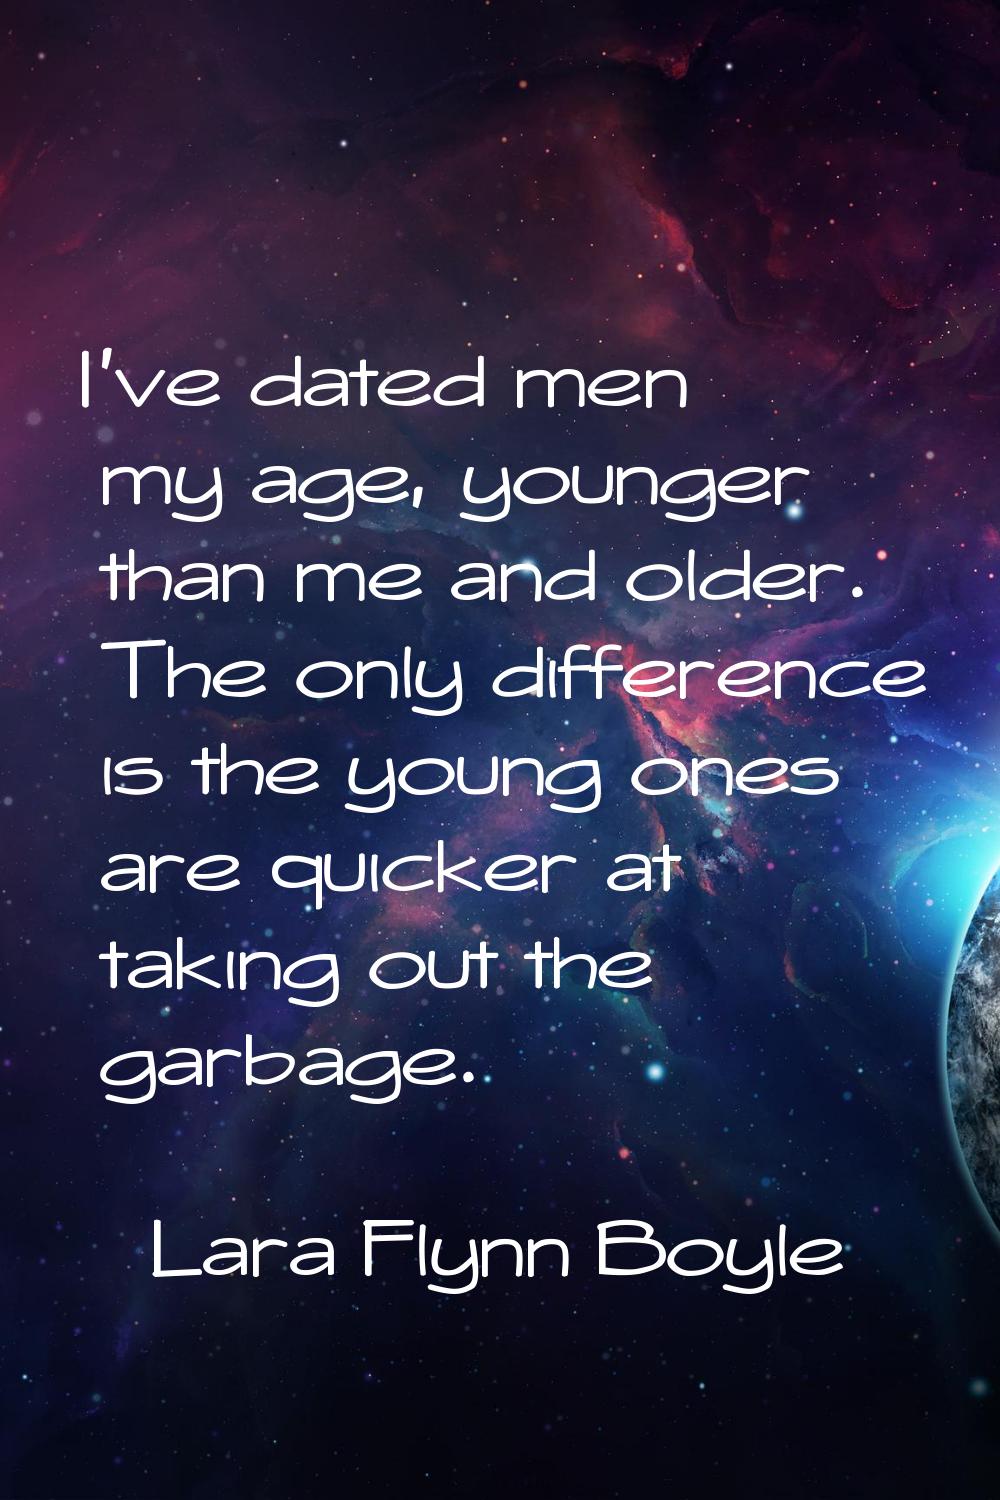 I've dated men my age, younger than me and older. The only difference is the young ones are quicker